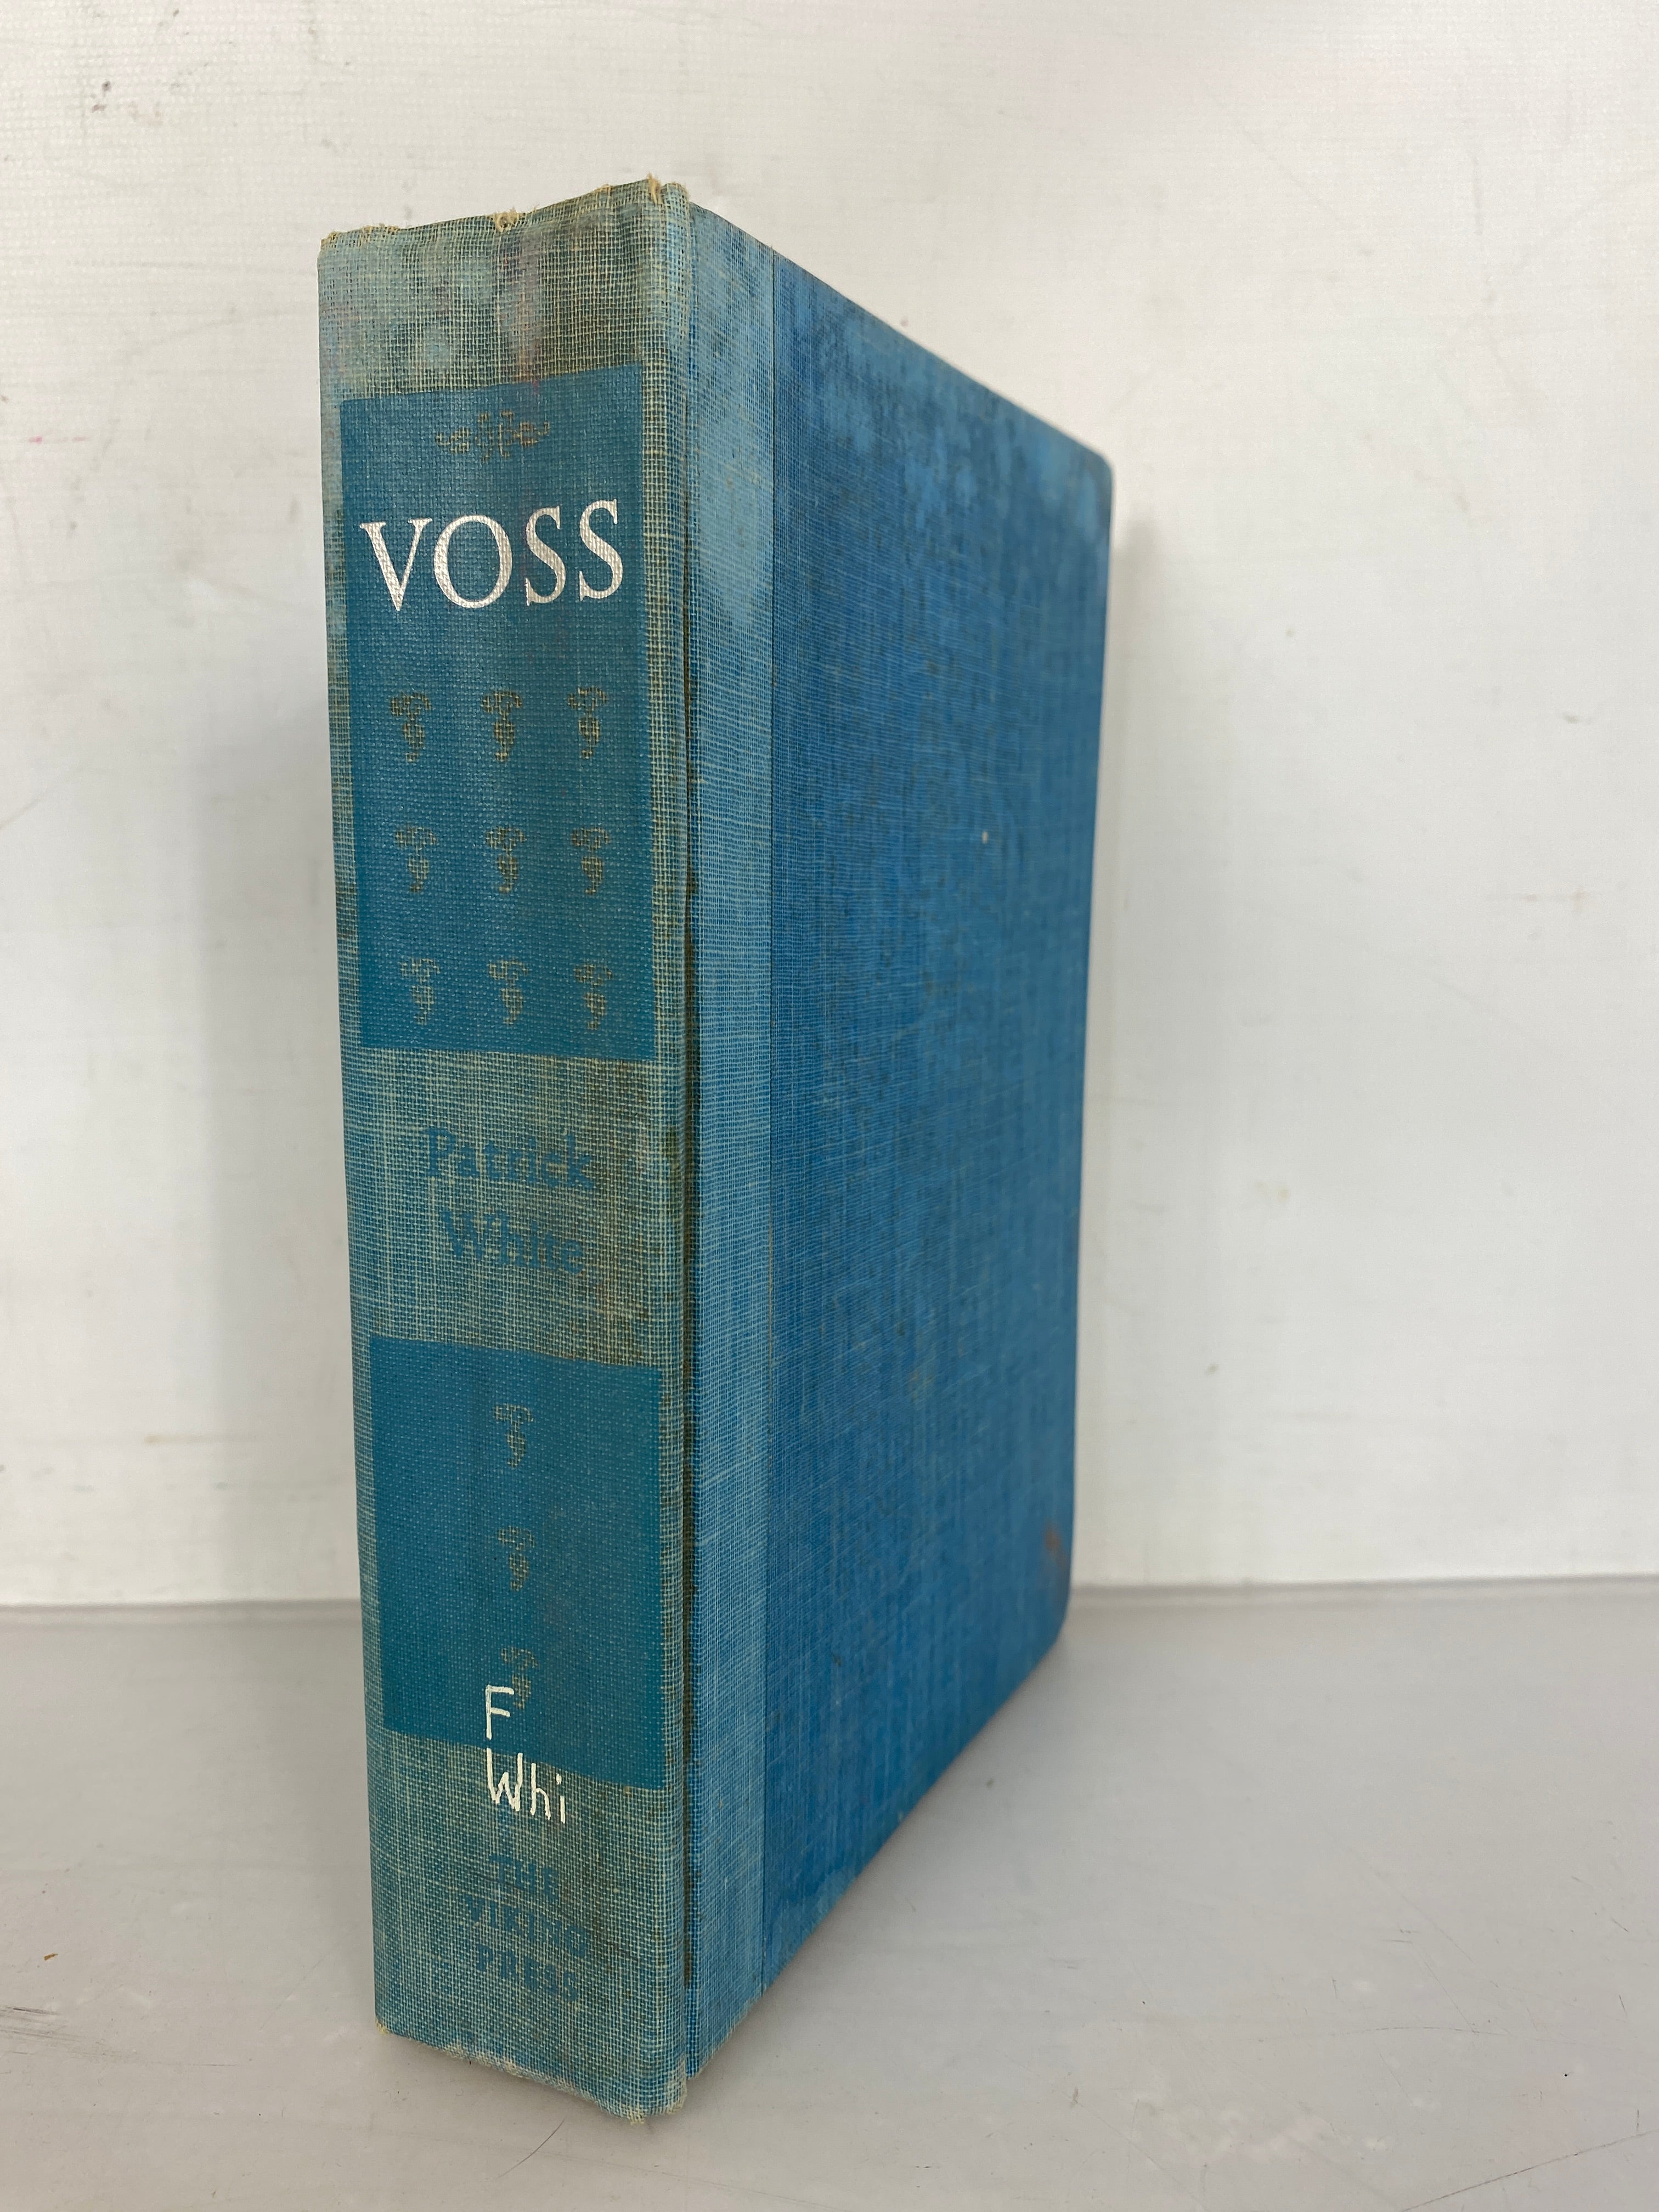 Vintage First Edition Voss by Patrick White 1957 HC Former Library Copy